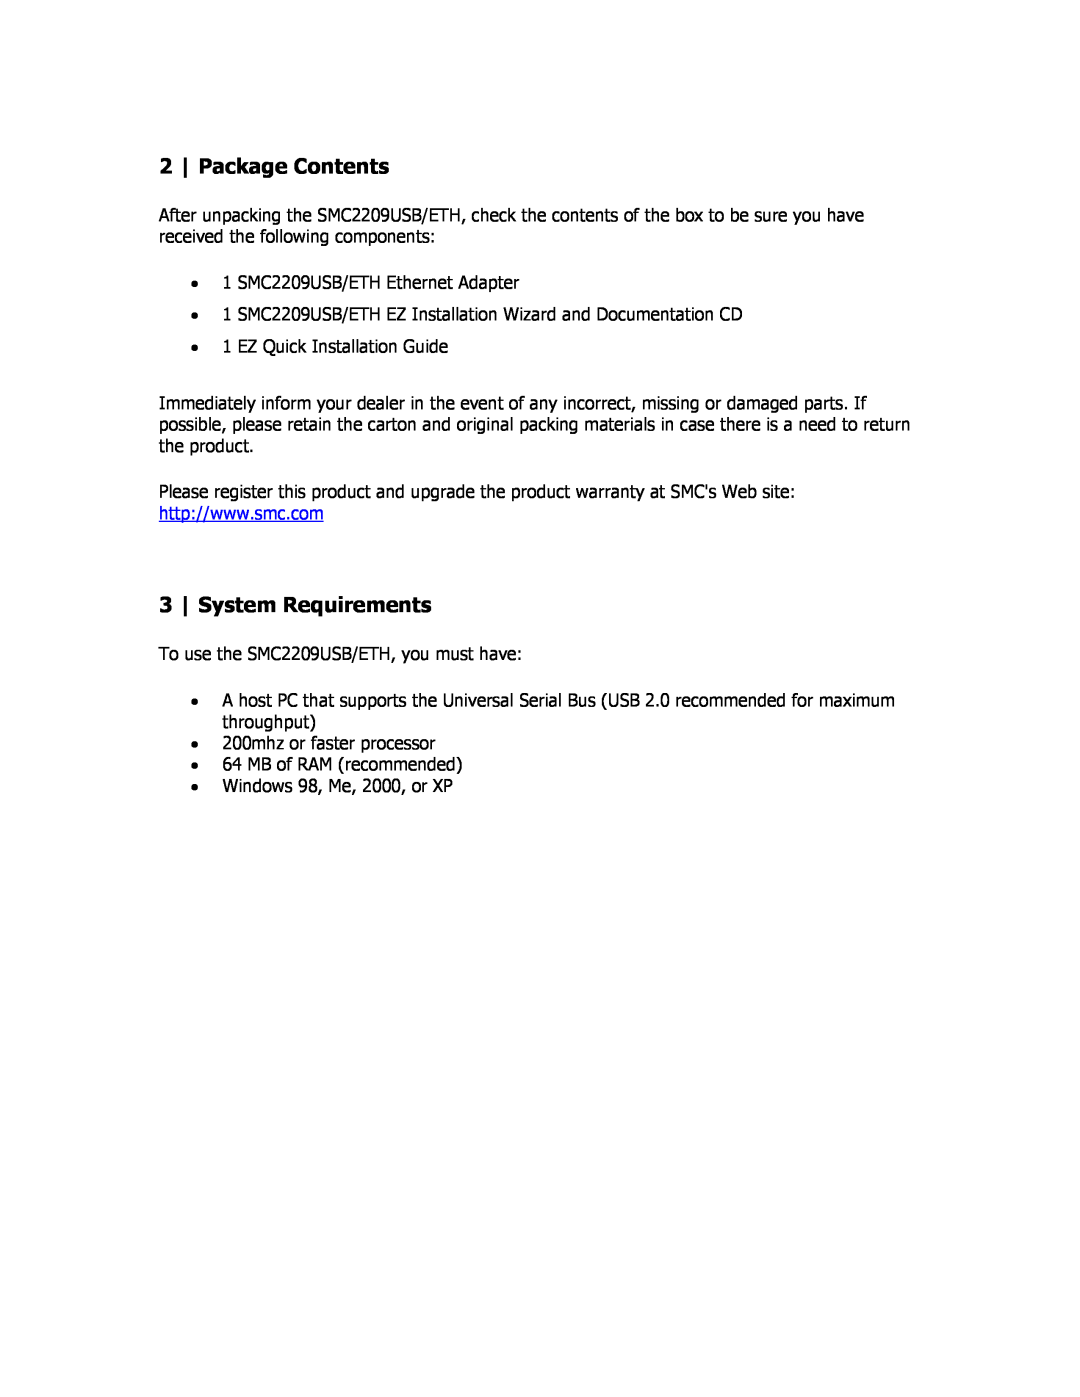 SMC Networks SMC2209USB/ETH manual Package Contents, System Requirements 